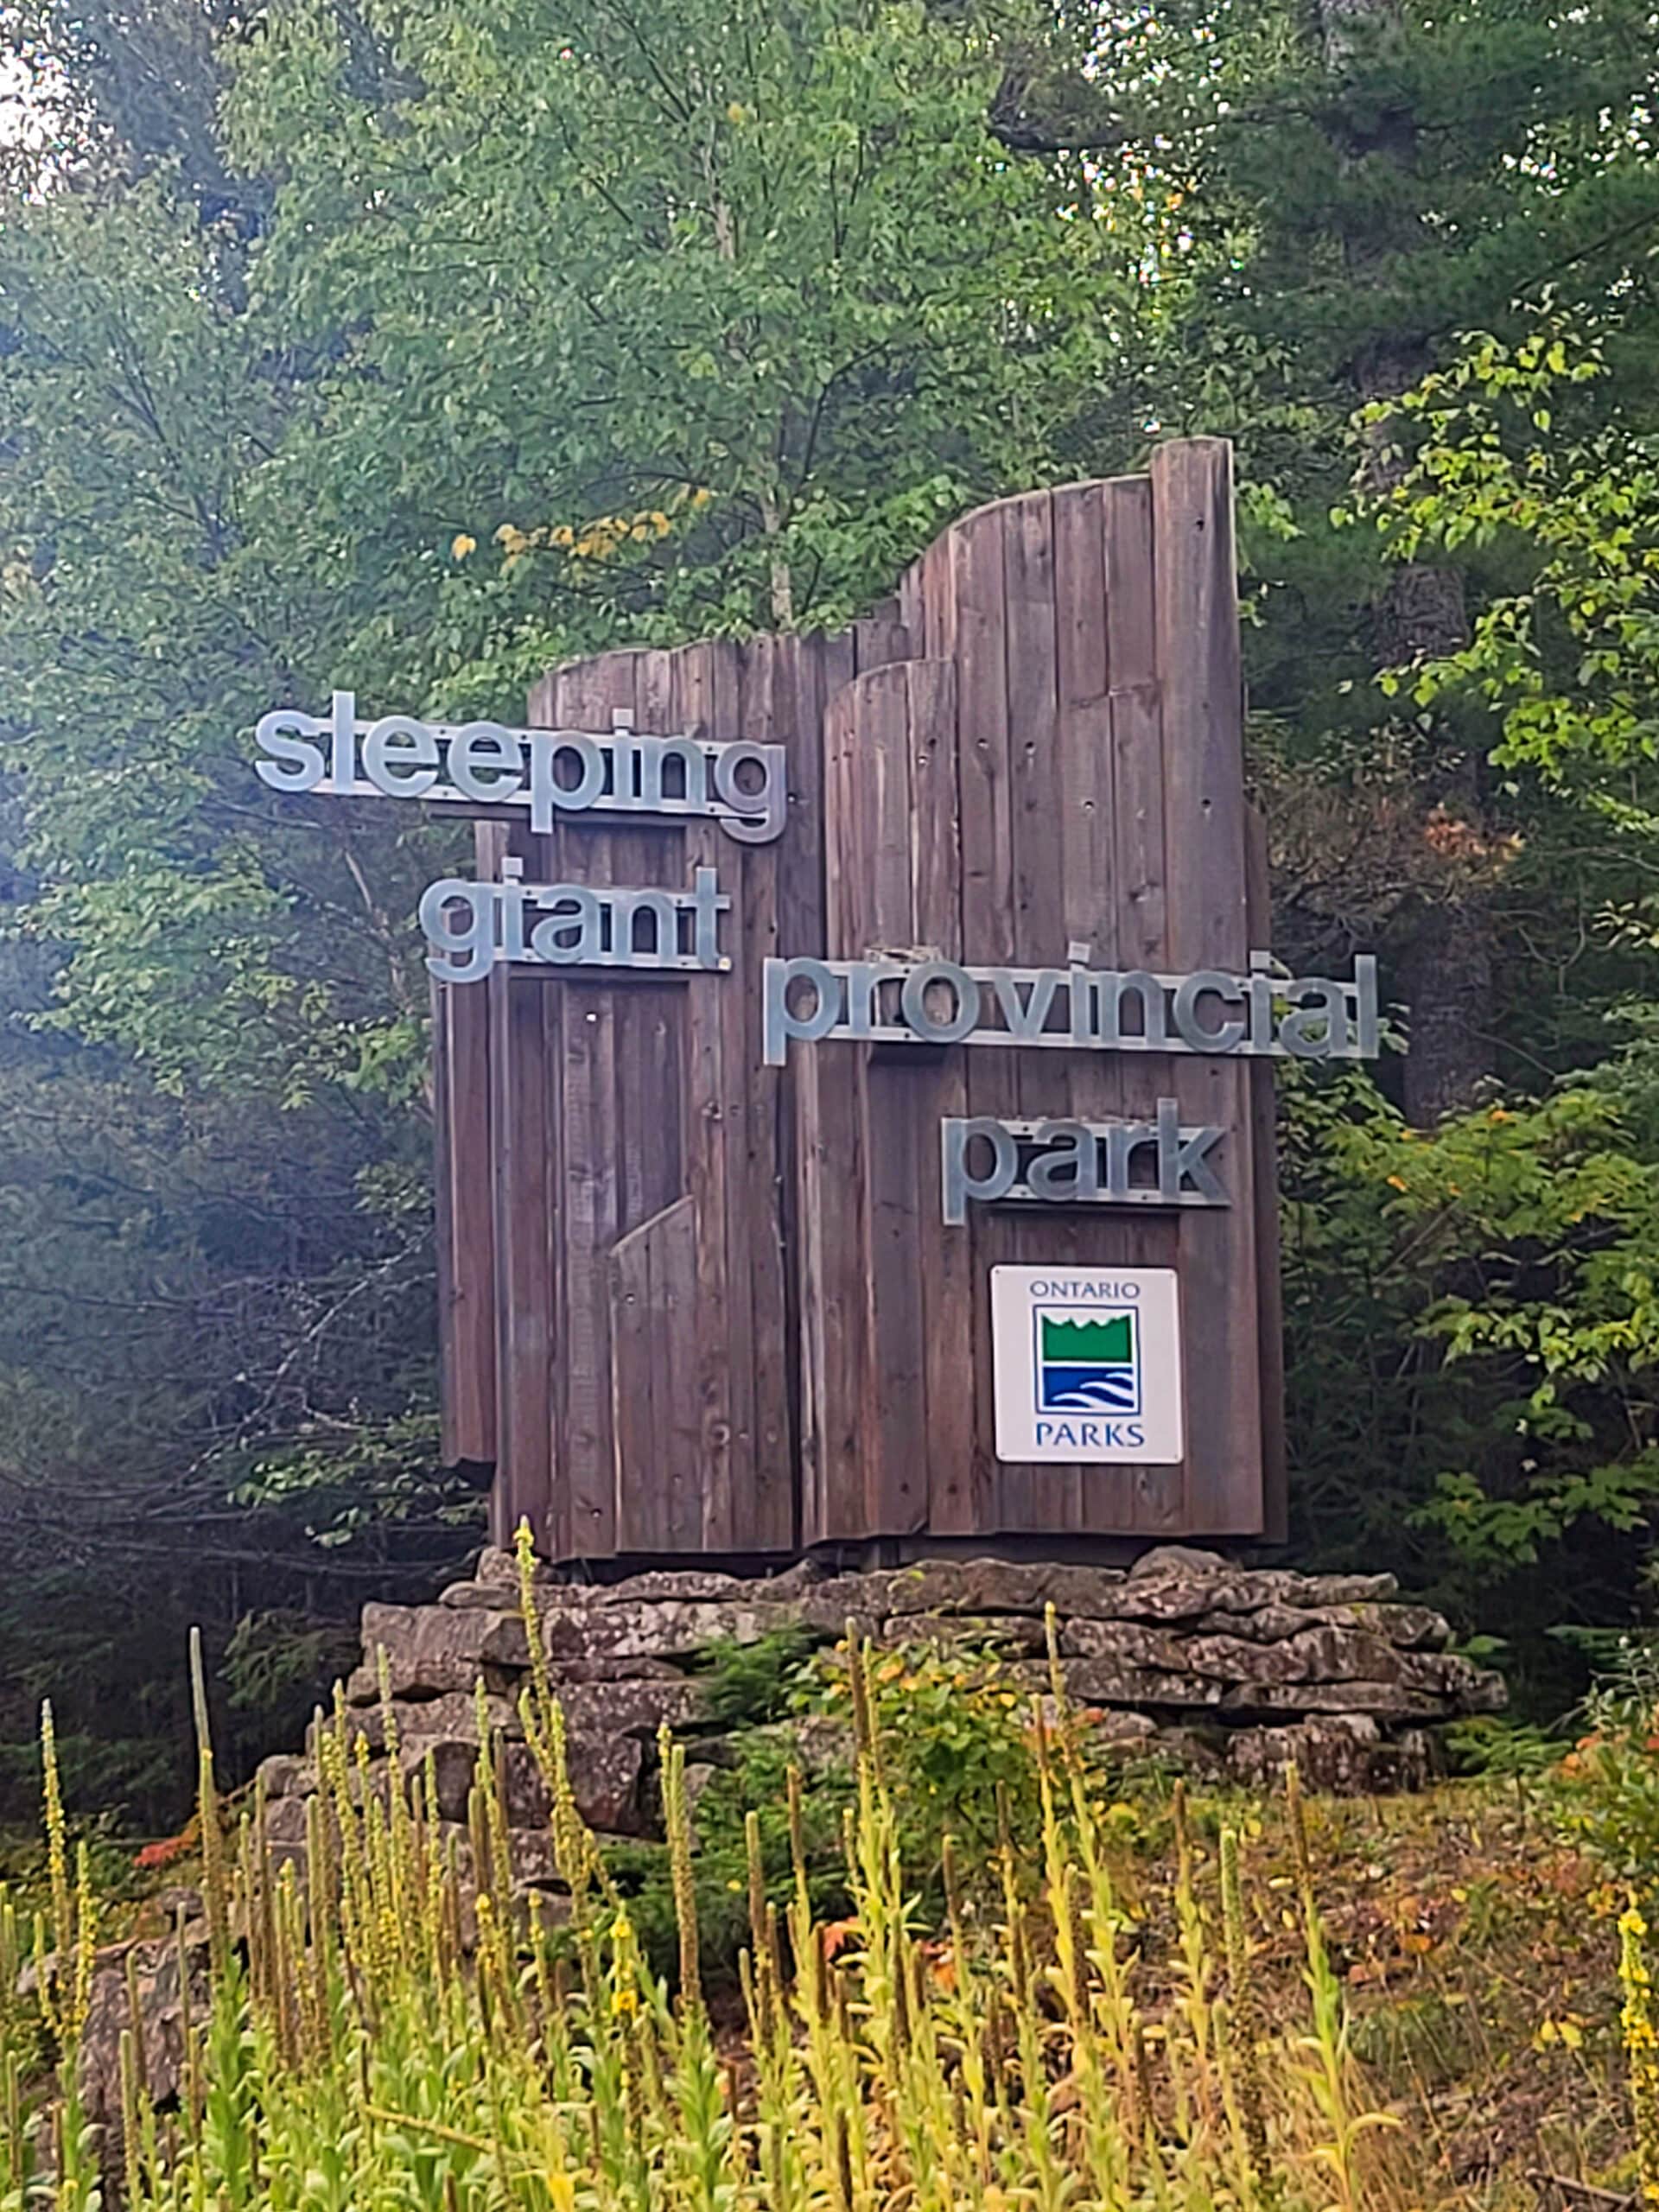 The sleeping giant provincial park sign at the entry to the park.